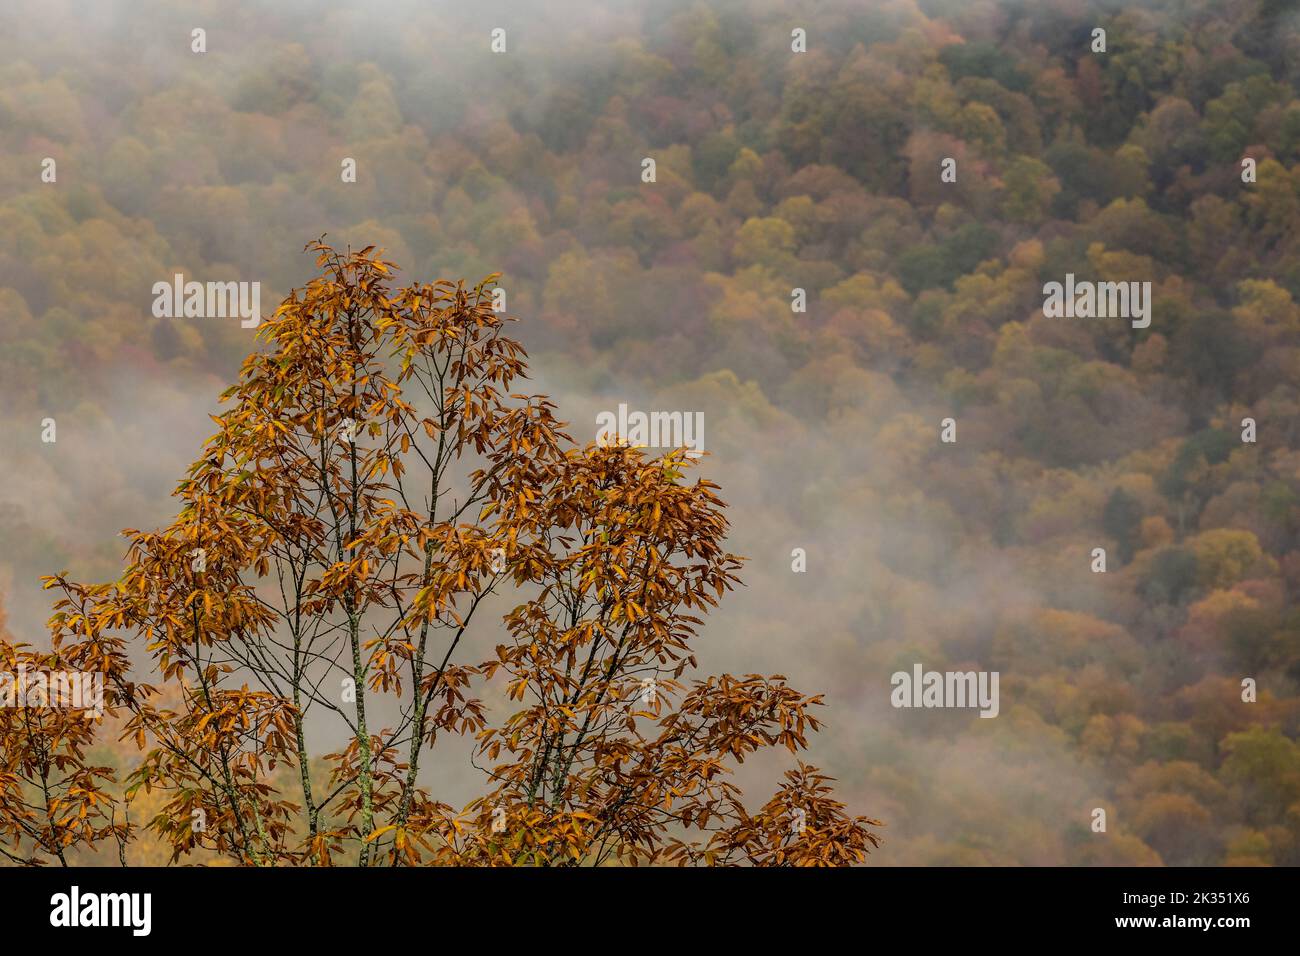 Leaves Changing Color On Single Tree With Fog And Forest In the Distance in the Blue Ridge mountains Stock Photo